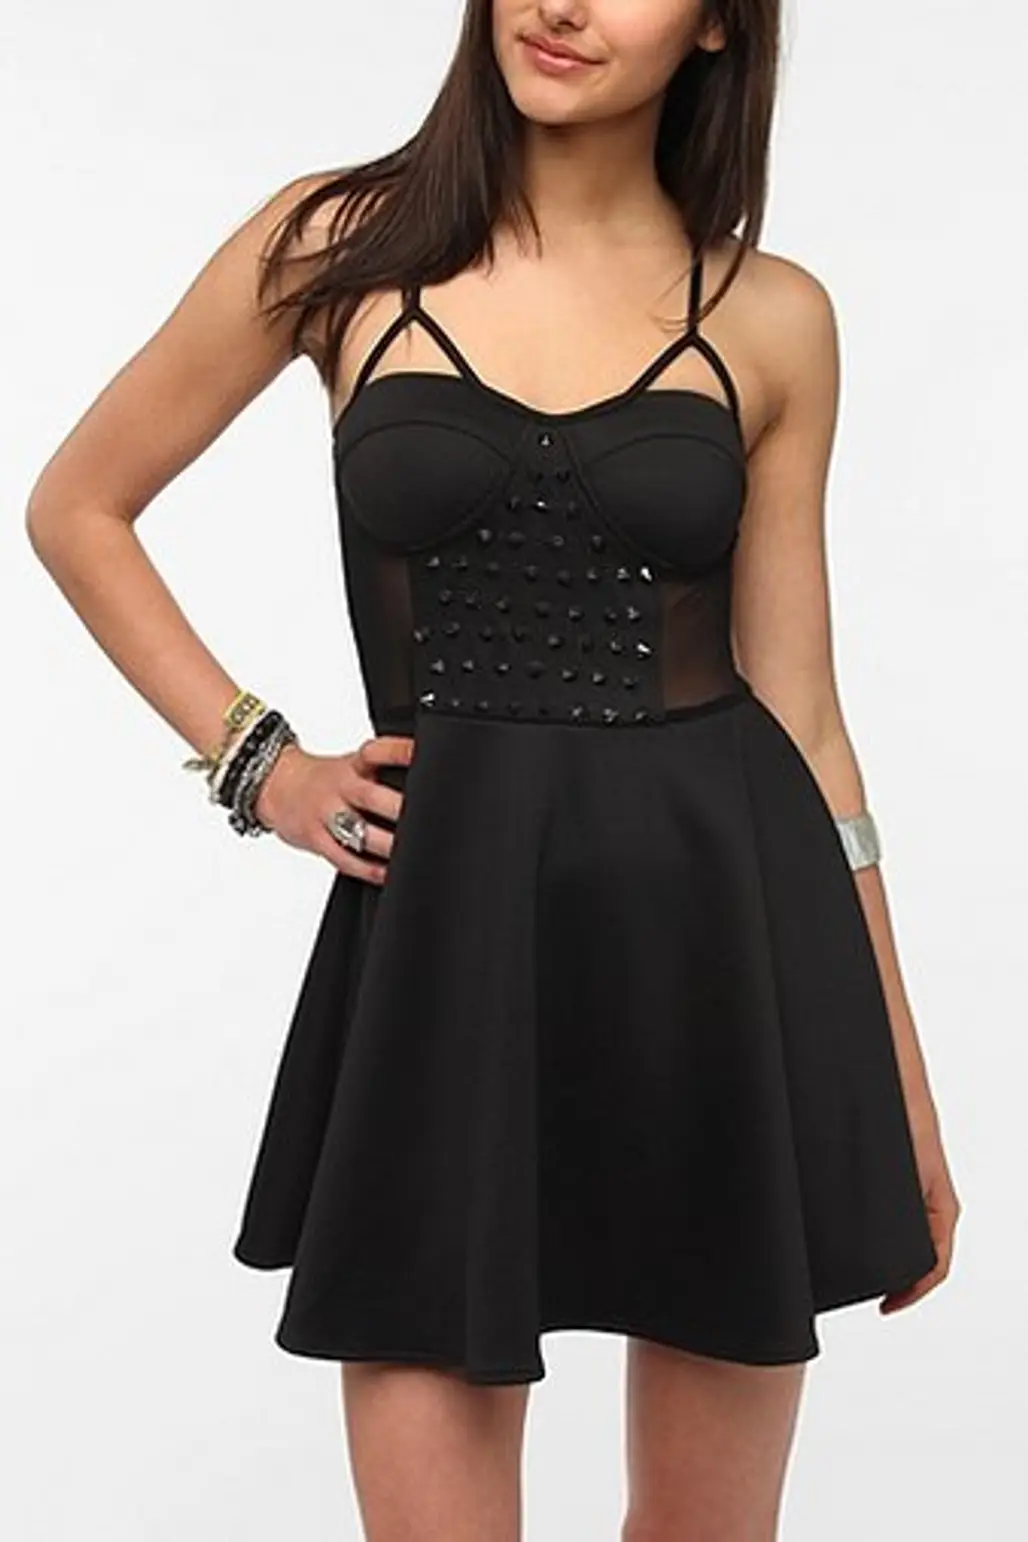 Urban Outfitters Reverse Spiked Sheer Inset Dress